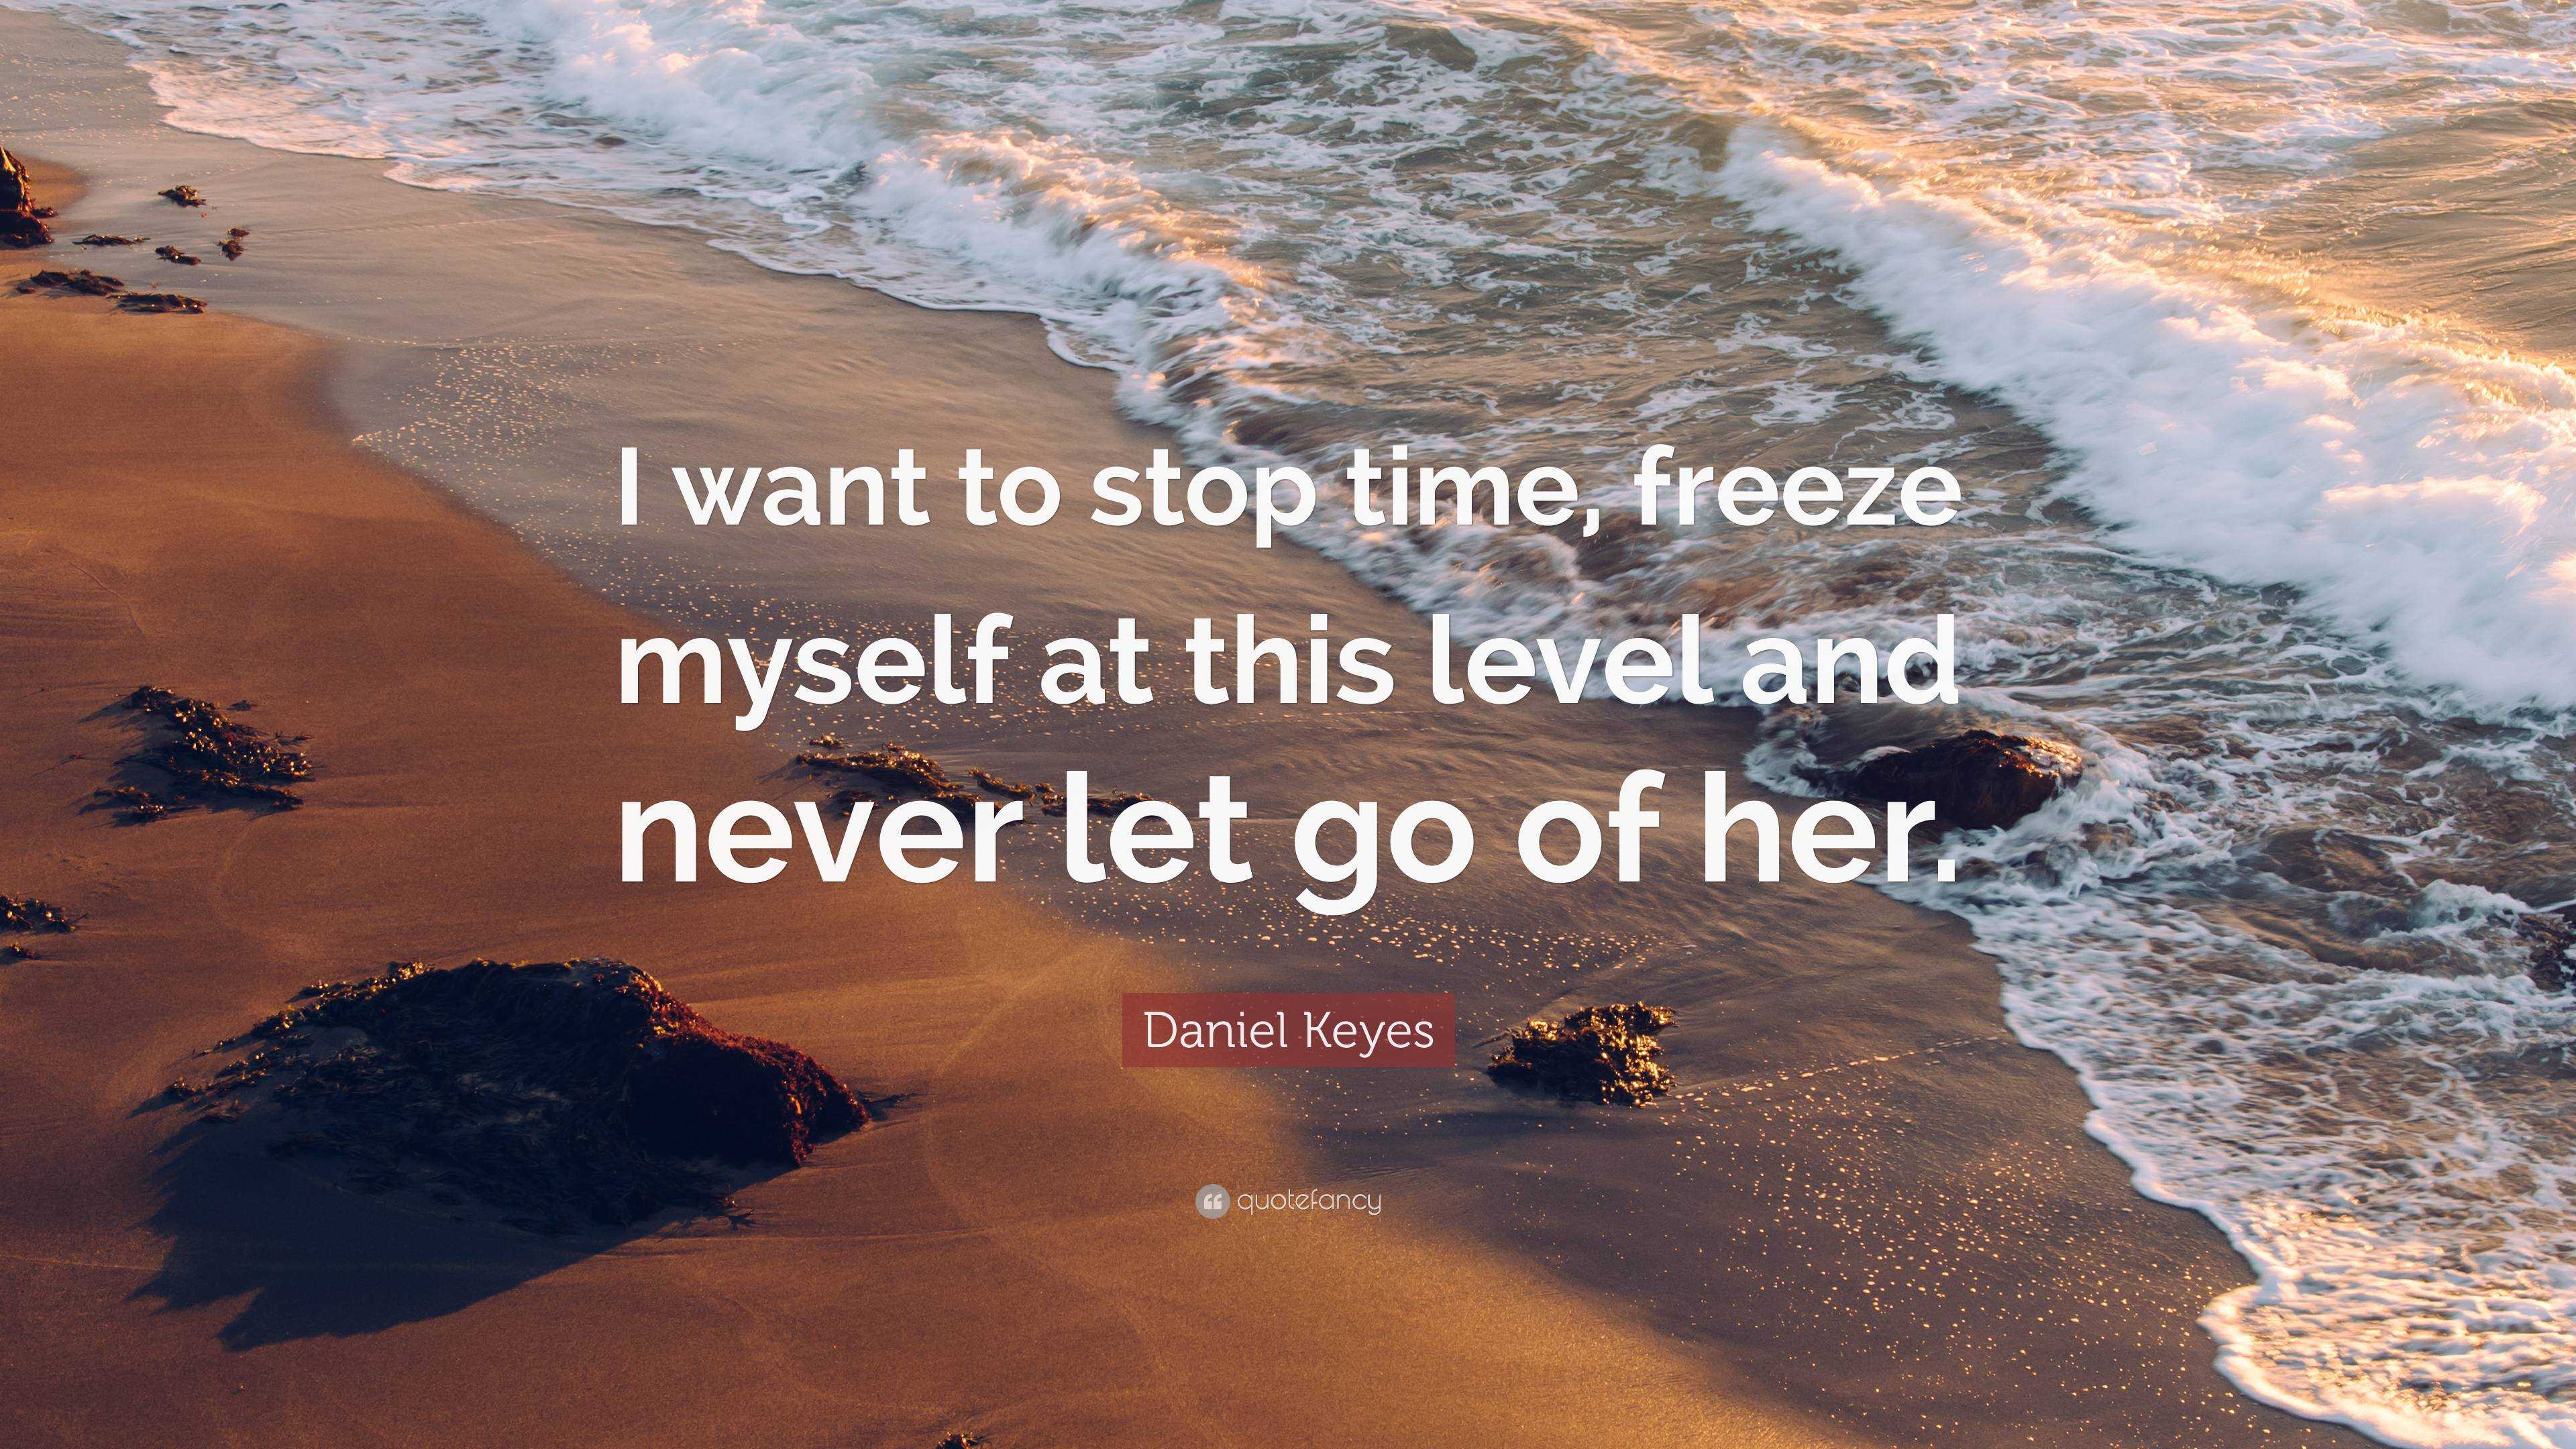 Daniel Keyes Quote: “I Want To Stop Time, Freeze Myself At This Level And Never Let